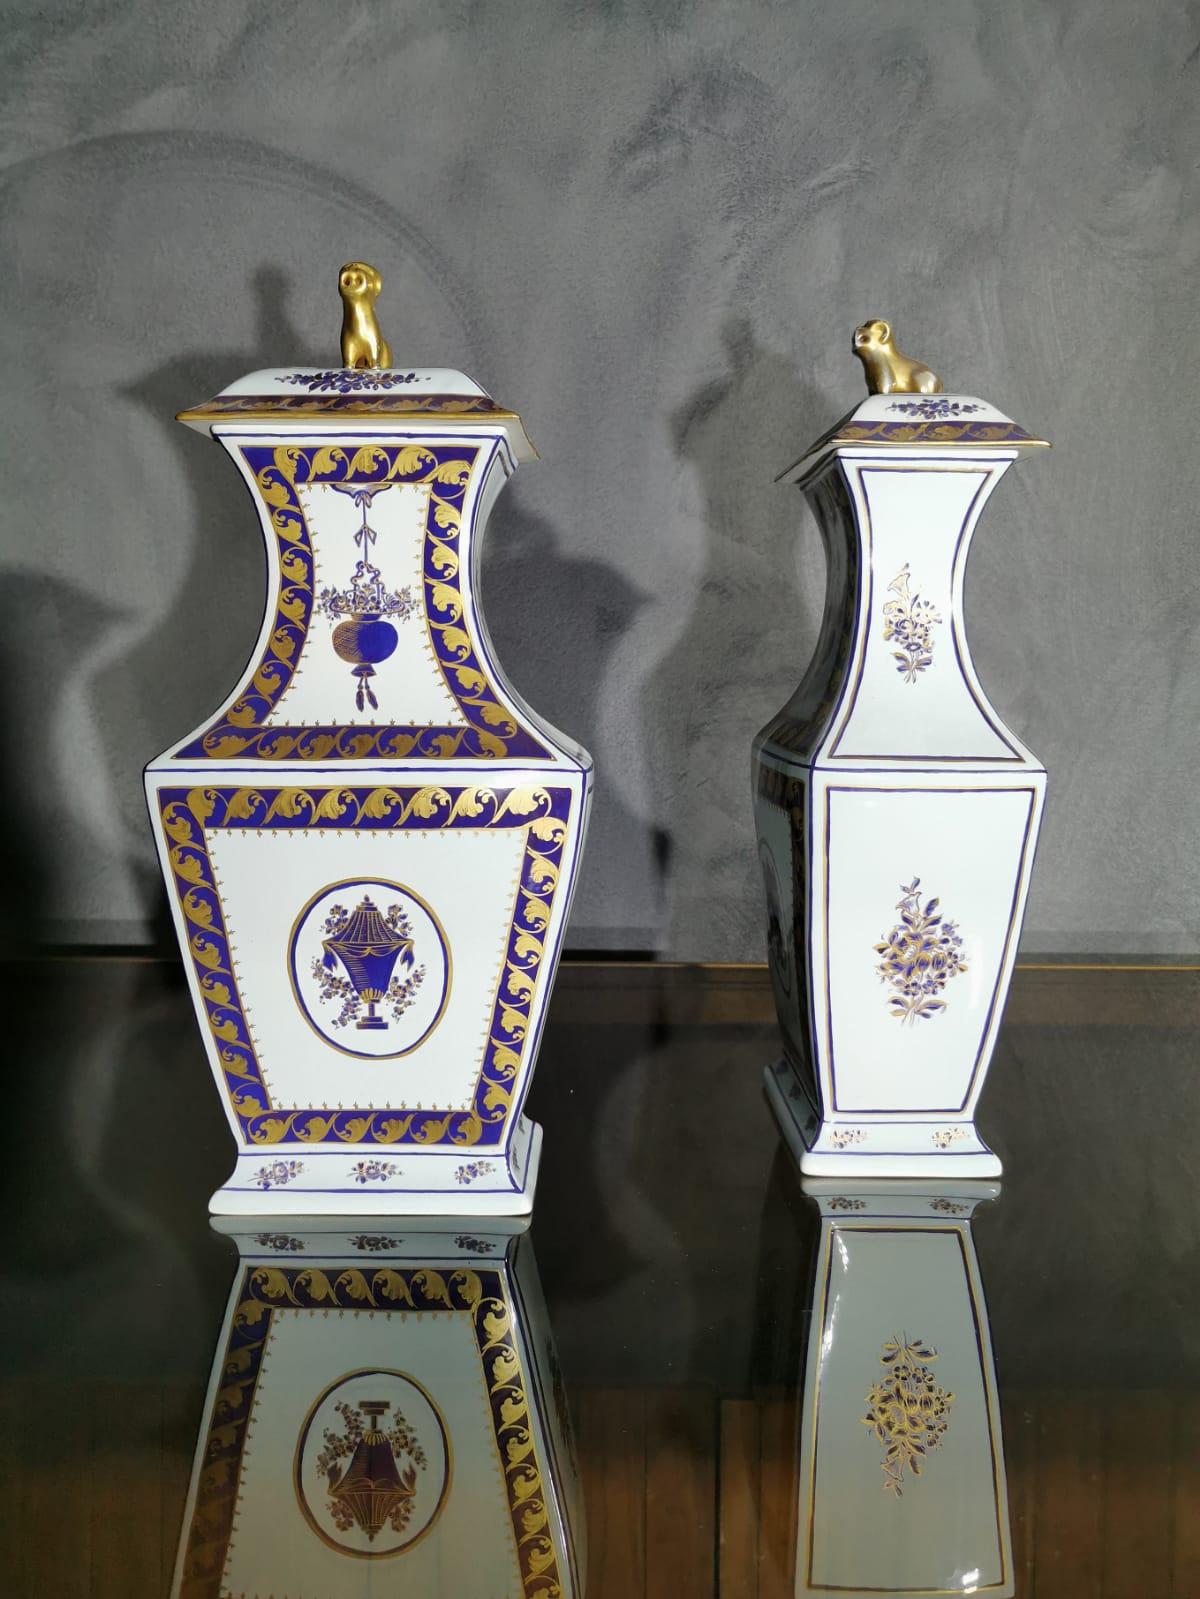 Antique set of 2 porcelain vases in pure Georgian style from the old Lowestoft porcelain factory with blue and gold decorations. Made in England in the 18/19th century.